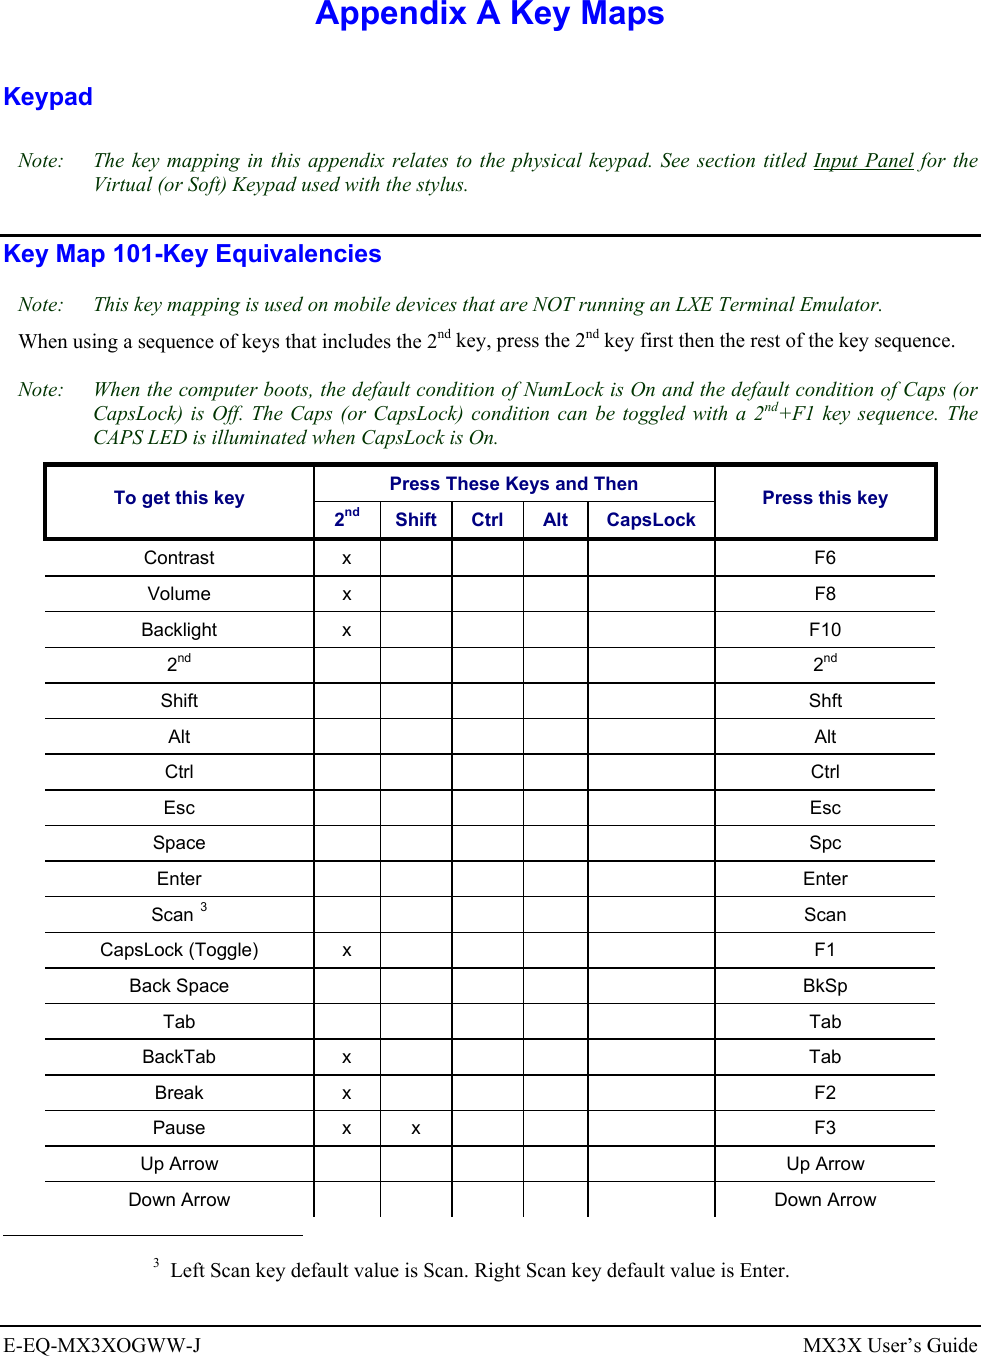  E-EQ-MX3XOGWW-J  MX3X User’s Guide  Appendix A Key Maps Keypad Note:  The key mapping in this appendix relates to the physical keypad. See section titled Input Panel for the Virtual (or Soft) Keypad used with the stylus. Key Map 101-Key Equivalencies Note:  This key mapping is used on mobile devices that are NOT running an LXE Terminal Emulator. When using a sequence of keys that includes the 2nd key, press the 2nd key first then the rest of the key sequence.  Note:  When the computer boots, the default condition of NumLock is On and the default condition of Caps (or CapsLock) is Off. The Caps (or CapsLock) condition can be toggled with a 2nd+F1 key sequence. The CAPS LED is illuminated when CapsLock is On. Press These Keys and Then To get this key 2nd Shift Ctrl  Alt  CapsLock Press this key Contrast x      F6 Volume x      F8 Backlight x      F10 2nd       2nd Shift       Shft Alt       Alt Ctrl       Ctrl Esc       Esc Space       Spc Enter       Enter Scan 3       Scan CapsLock (Toggle)  x          F1 Back Space            BkSp Tab       Tab BackTab x      Tab Break x      F2 Pause x x     F3 Up Arrow            Up Arrow Down Arrow            Down Arrow                                                            3  Left Scan key default value is Scan. Right Scan key default value is Enter.  